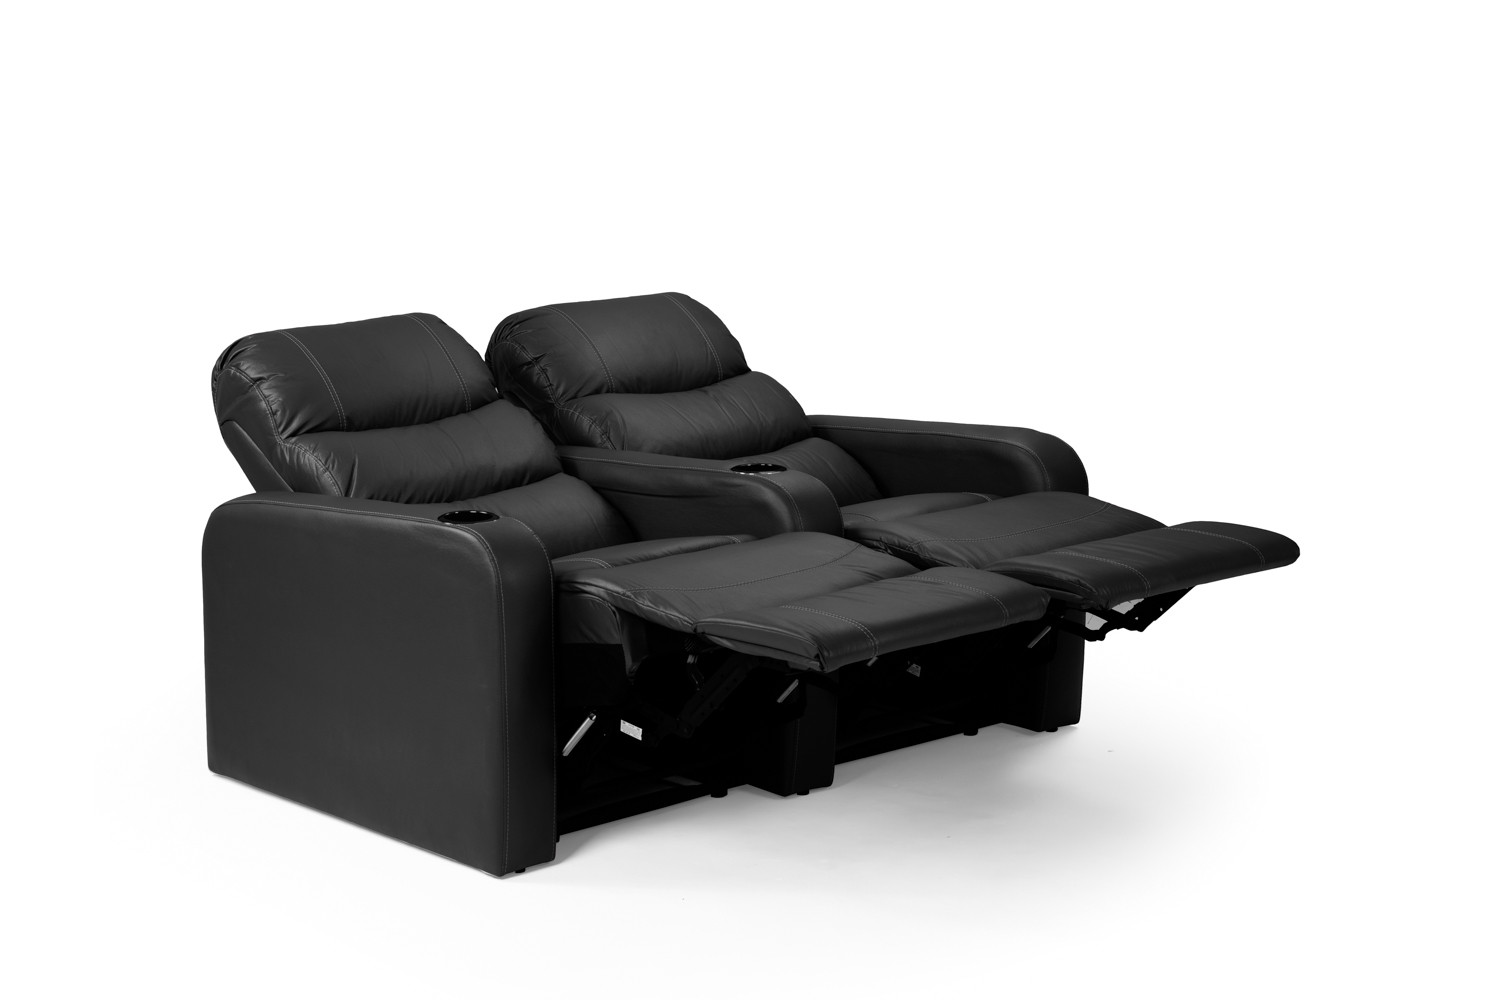 Cinema Pro 2 Seater Recliner - Black Recliner Couches - 6